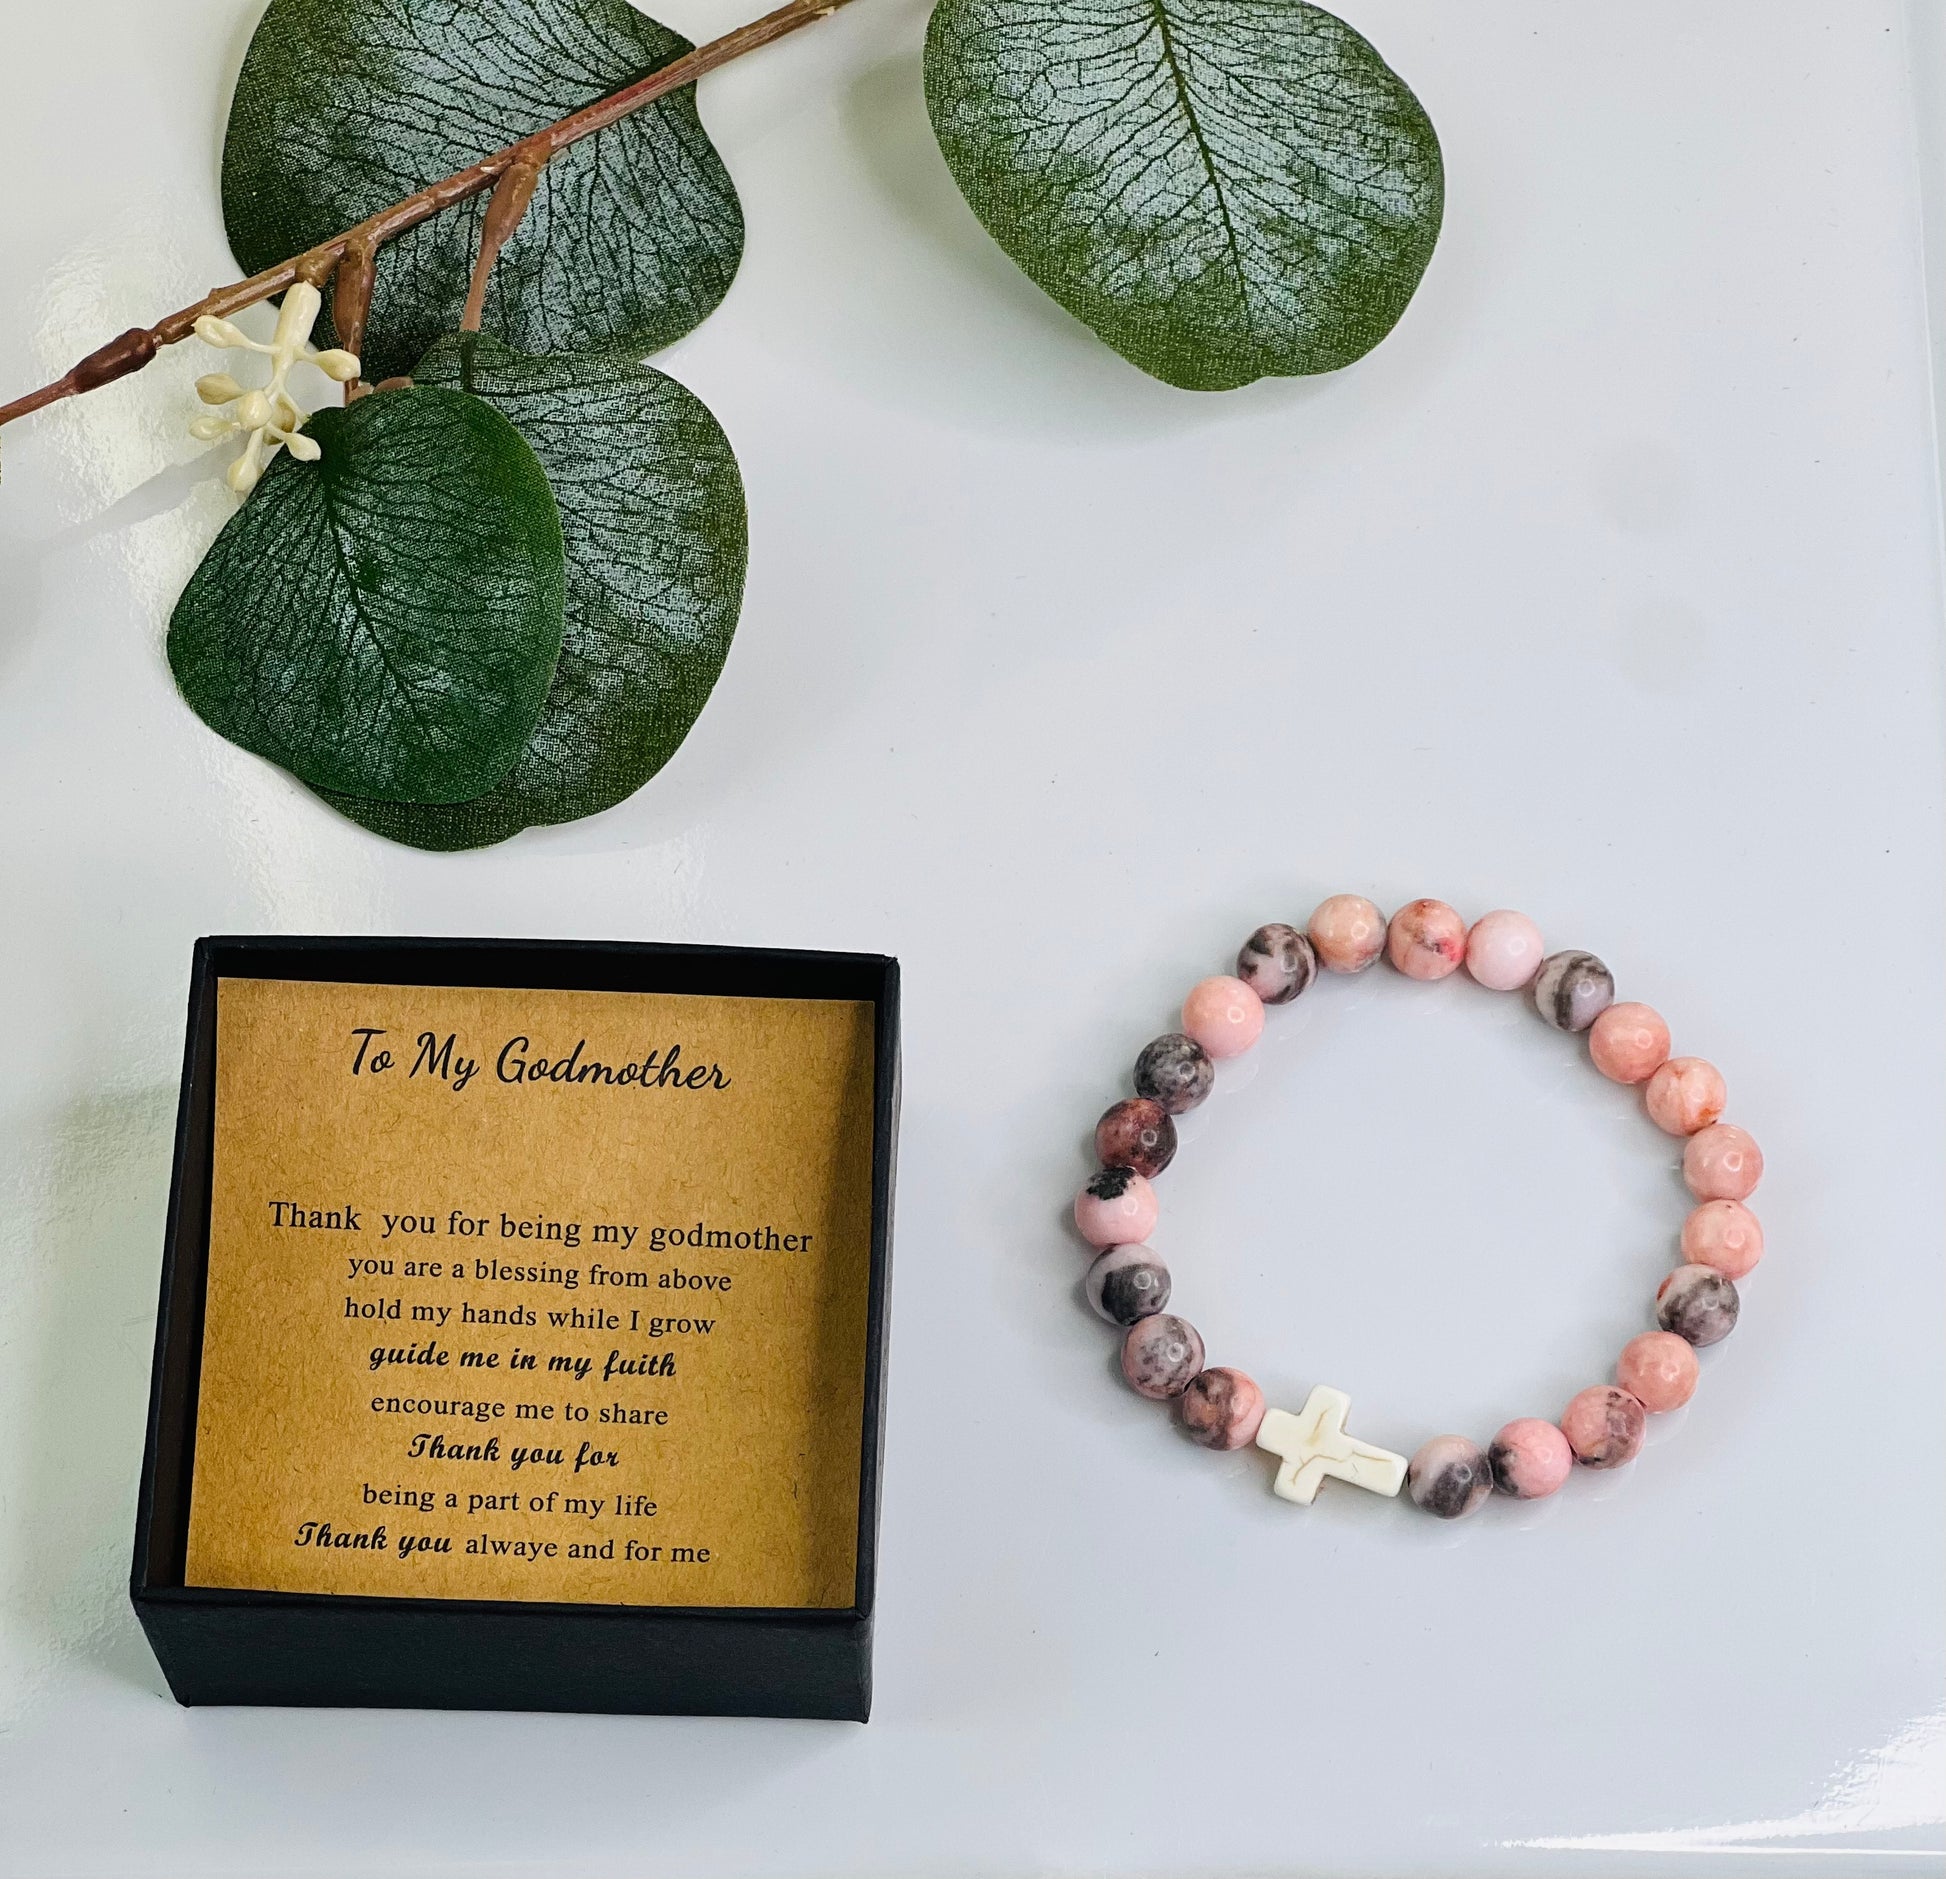 "To My Godmother" Natural Stone Bead Bracelet with Card